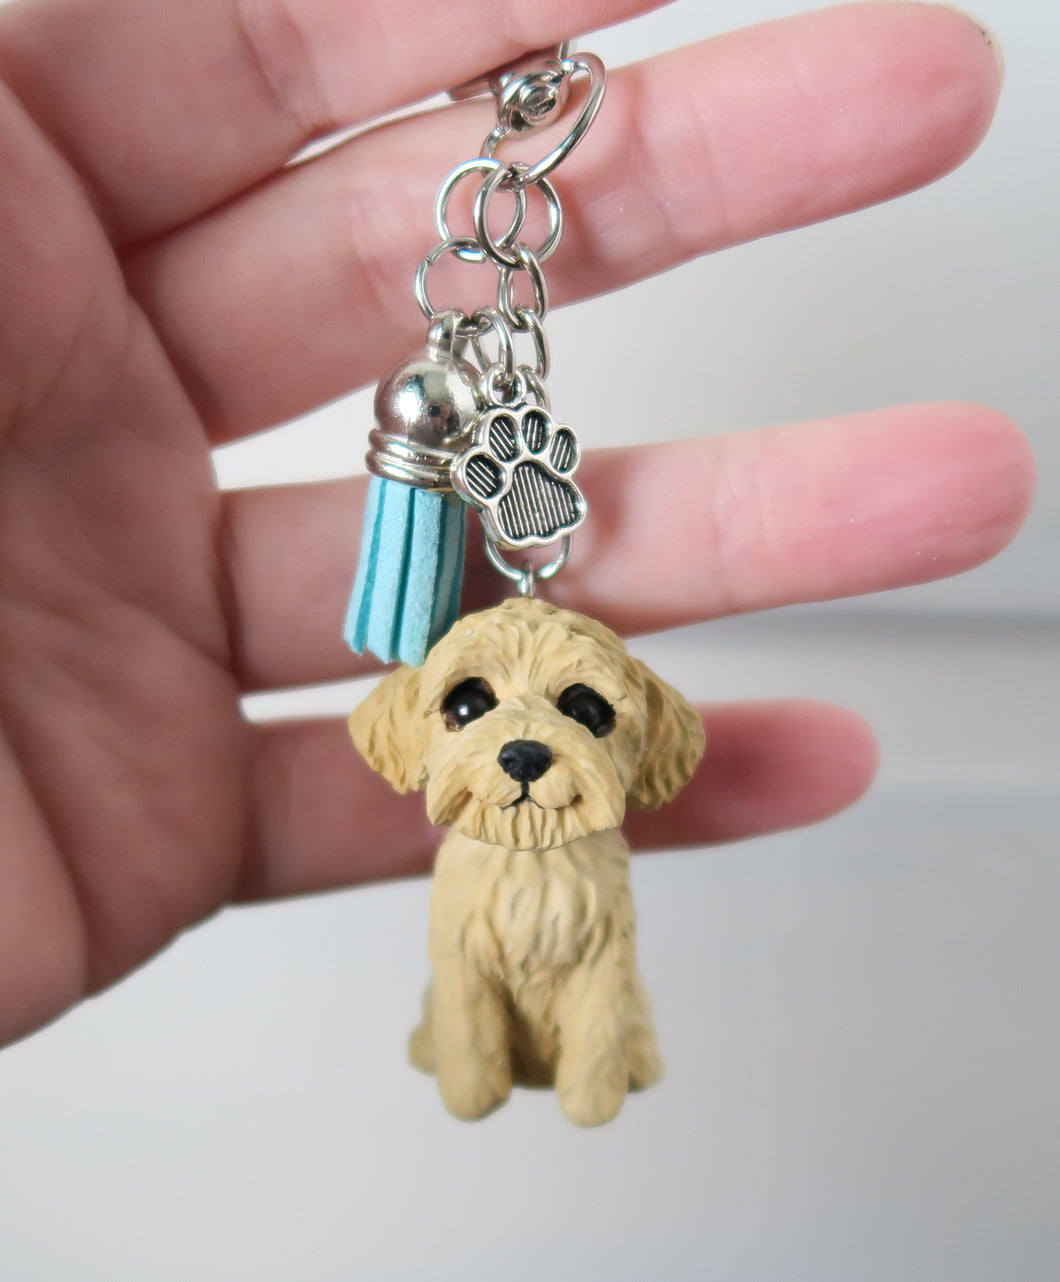 Goldendoodle or any Poodle Mix Tassel Charm Handmade Resin Collectible Purse, backpack, or key chain charm